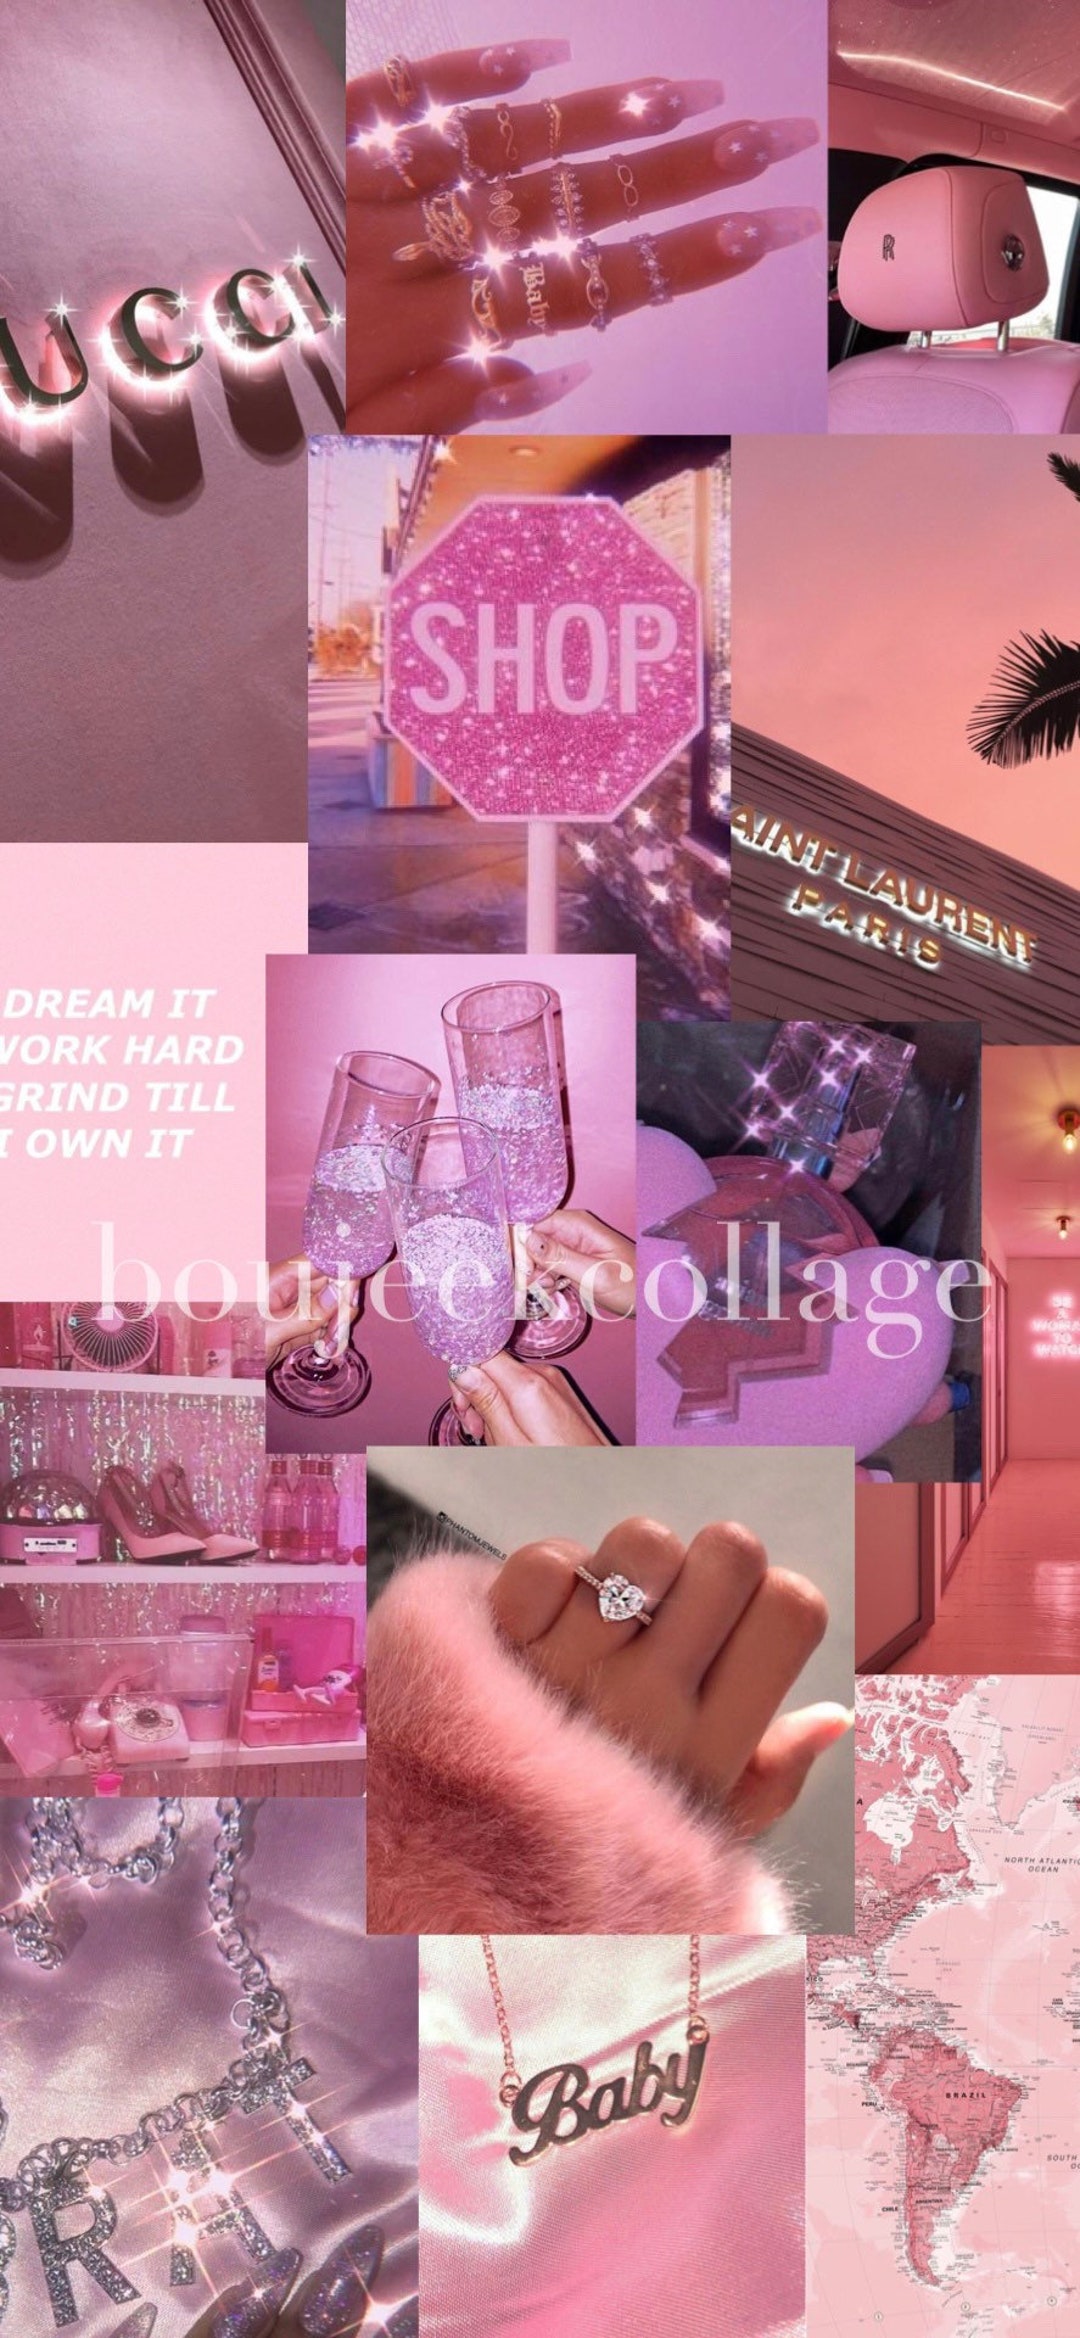 Buy Pink Boujee Aesthetic Collage Phone Wallpaper Aesthetic Online in India   Etsy